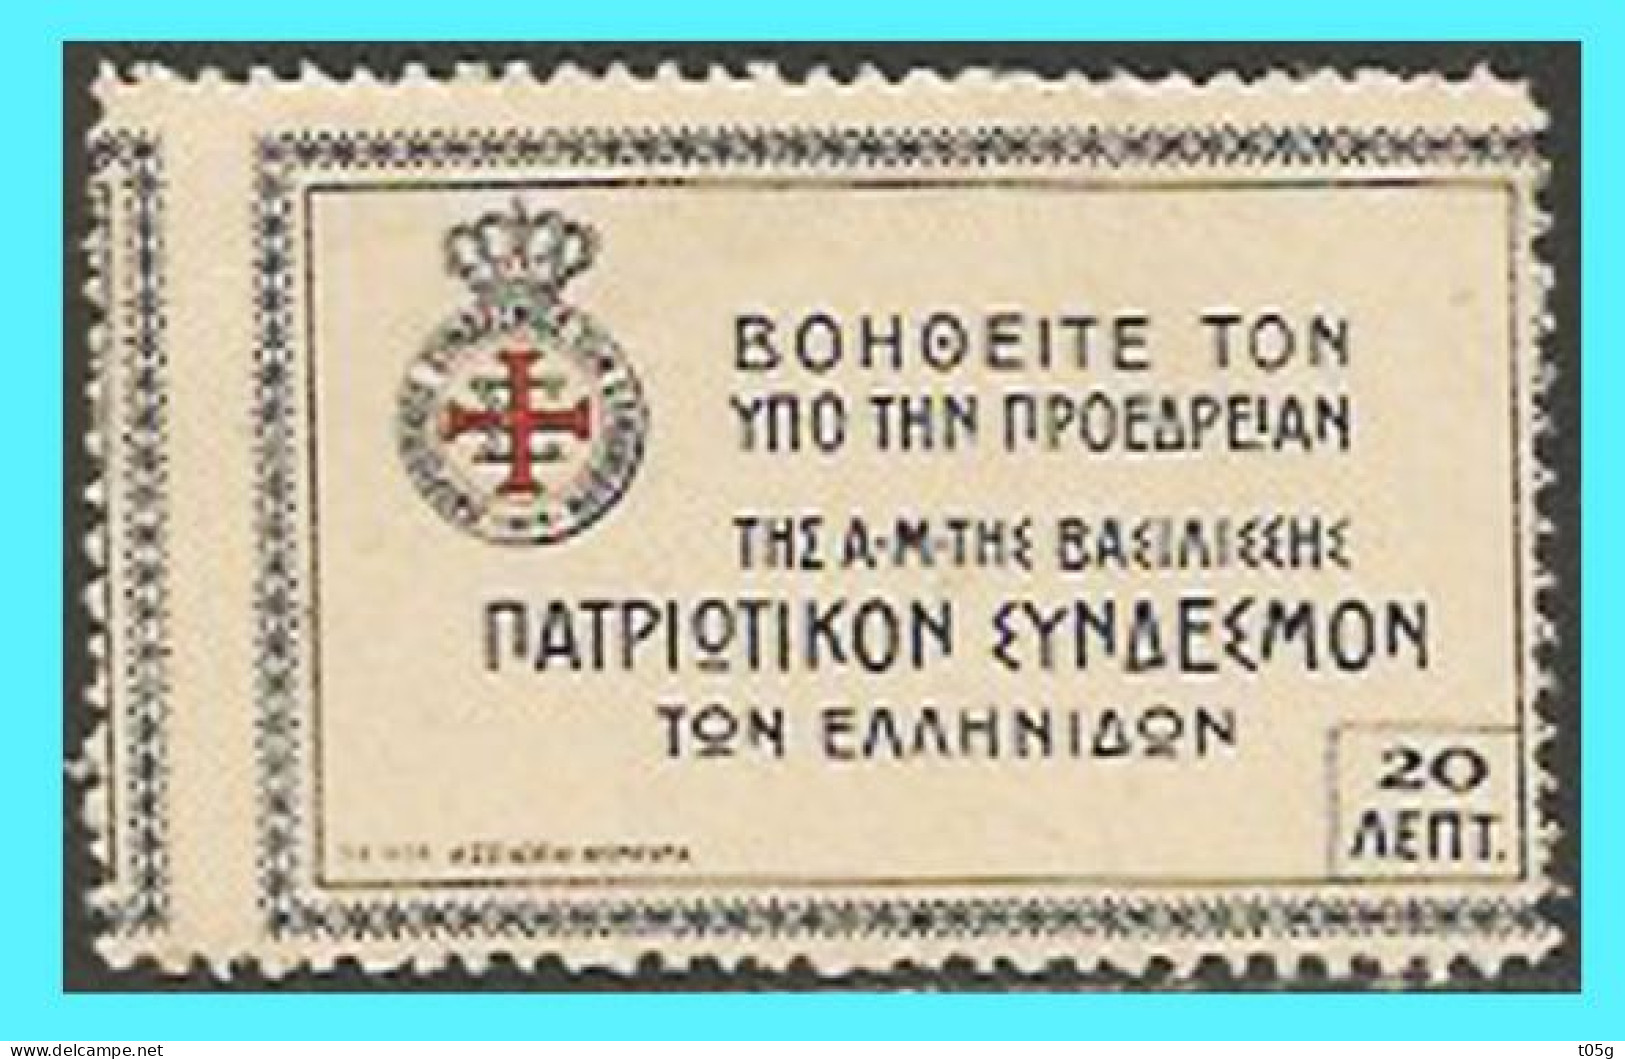 GREECE- GRECE- HELLAS  1915: 20L Error Perforation. " Greek Wommen"s Patriotic League" Charity Stamps From. Set MNH** - Charity Issues